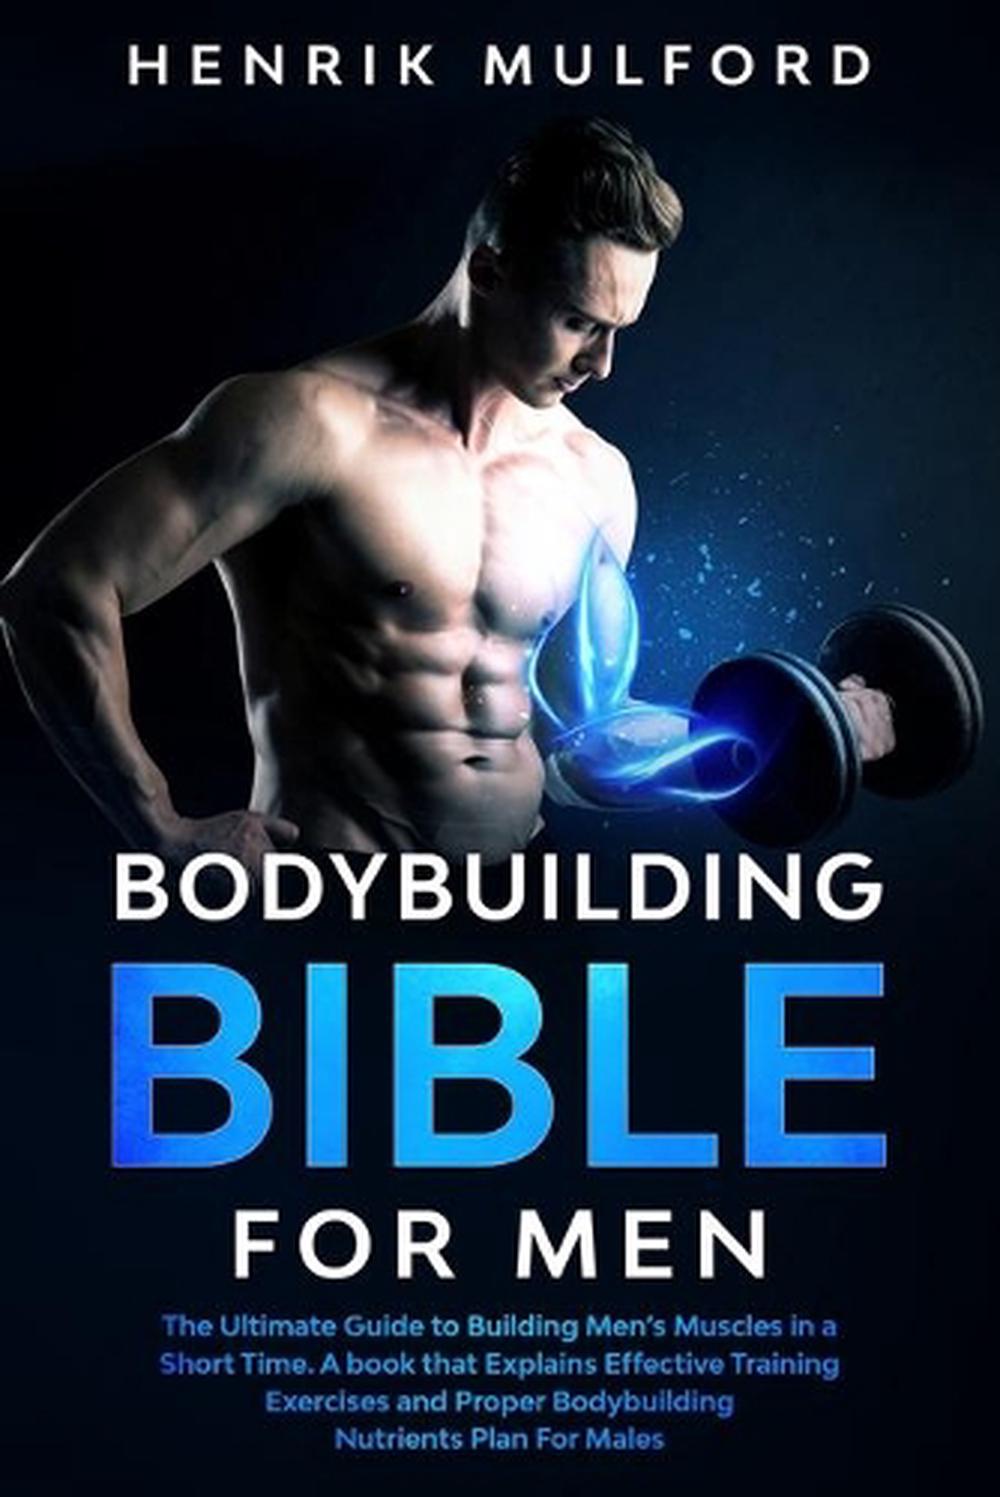 Bodybuilding Bible for Men by Henrik Mulford Free Shipping